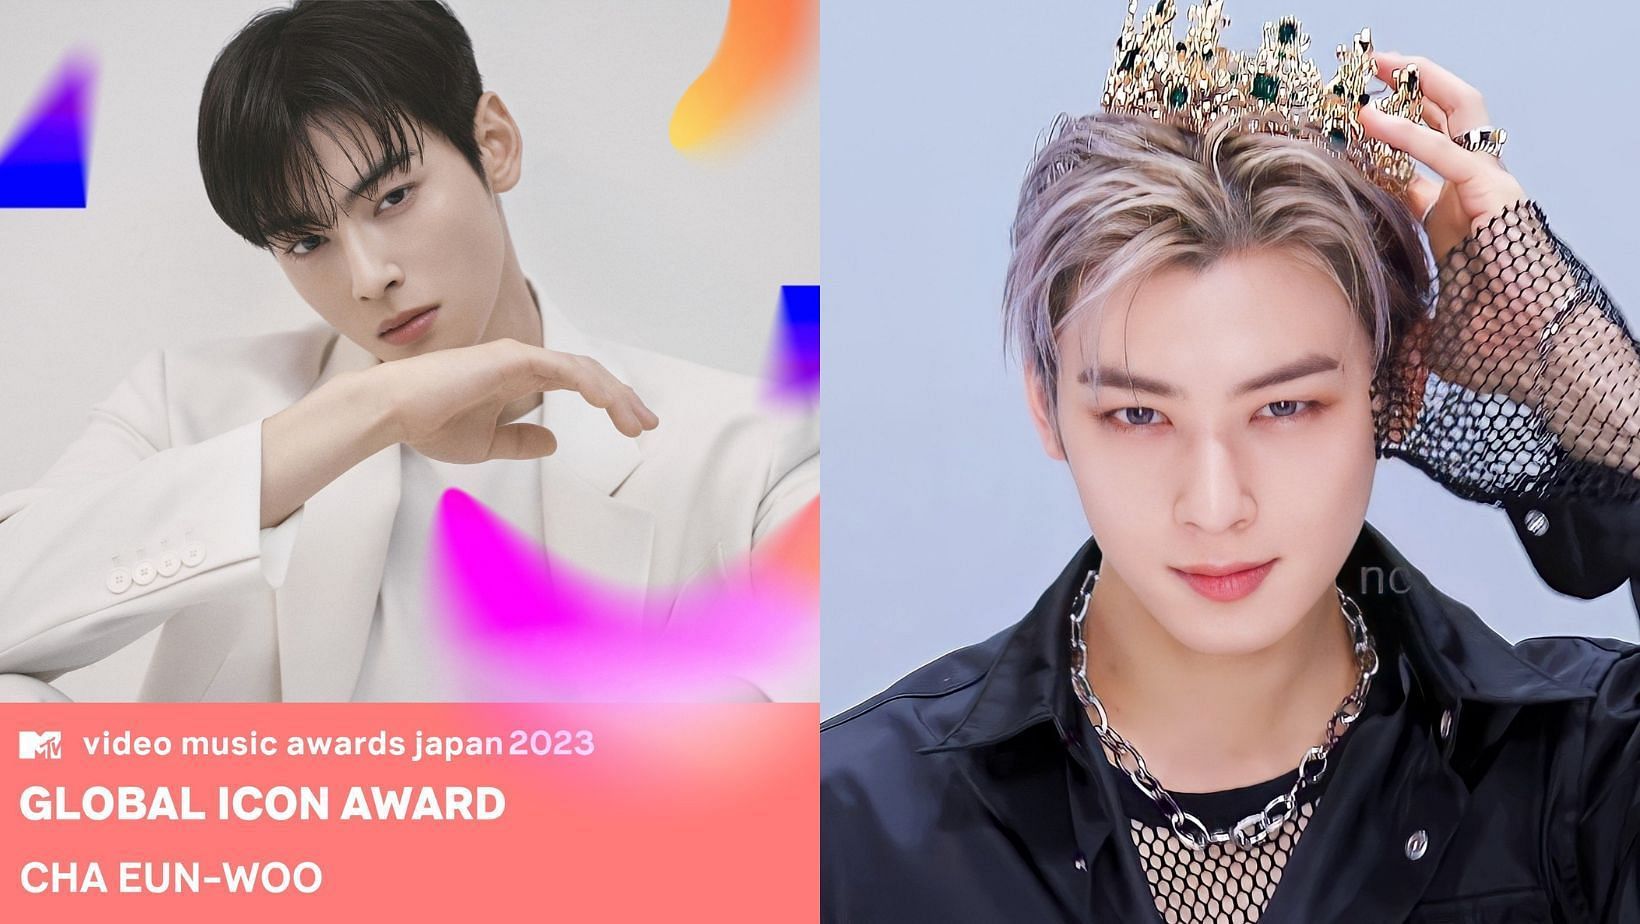 Cha Eunwoo becomes the first Asian artist to win the Global Icon Award at the 2023 MTV VMAs Japan. (Images via X/@TNg78778865 and @viraltakes)